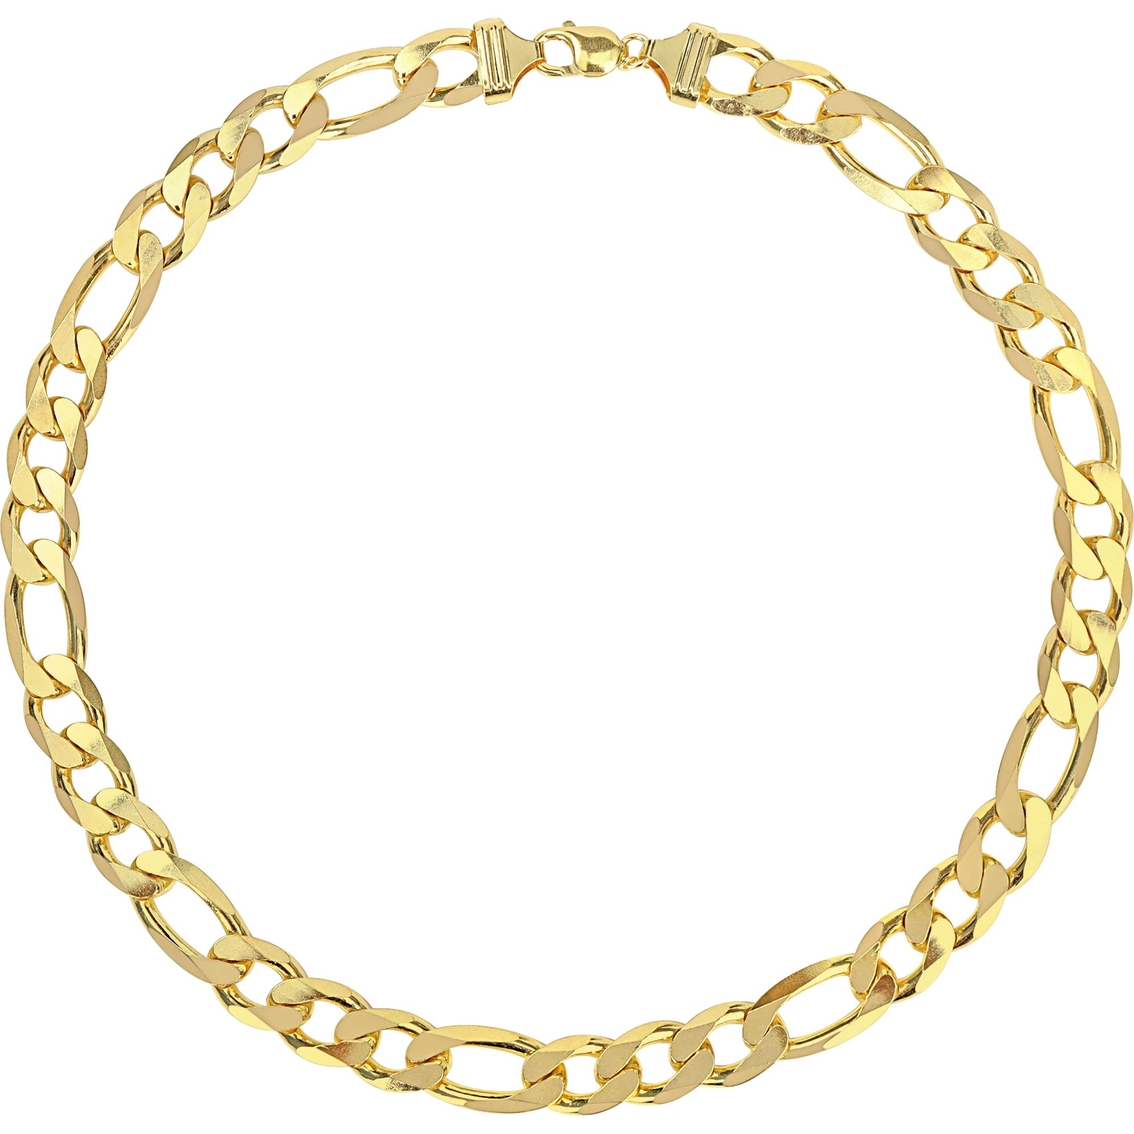 Sofia B. 18K Gold Over Sterling Silver 14.5mm Figaro Chain Necklace - Image 3 of 5